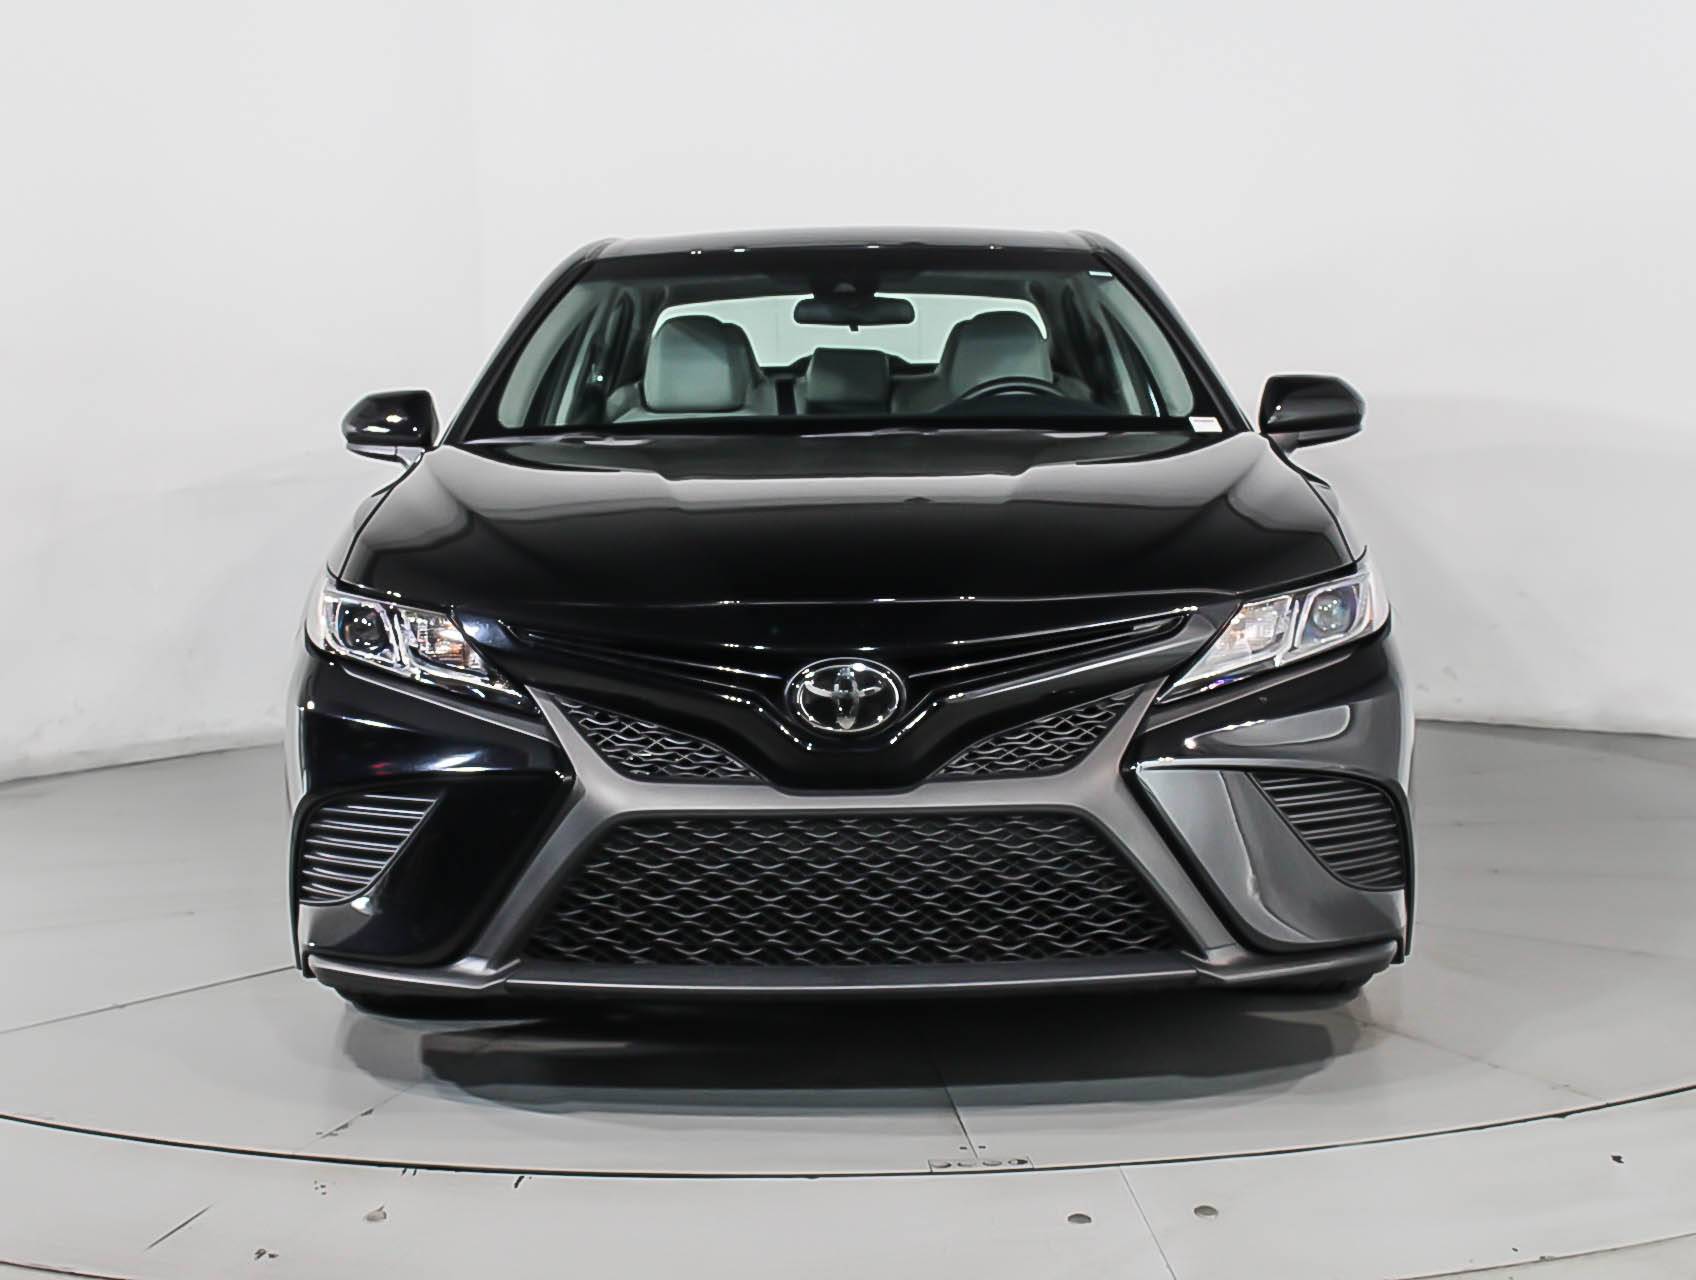 Florida Fine Cars - Used TOYOTA CAMRY 2018 WEST PALM Se